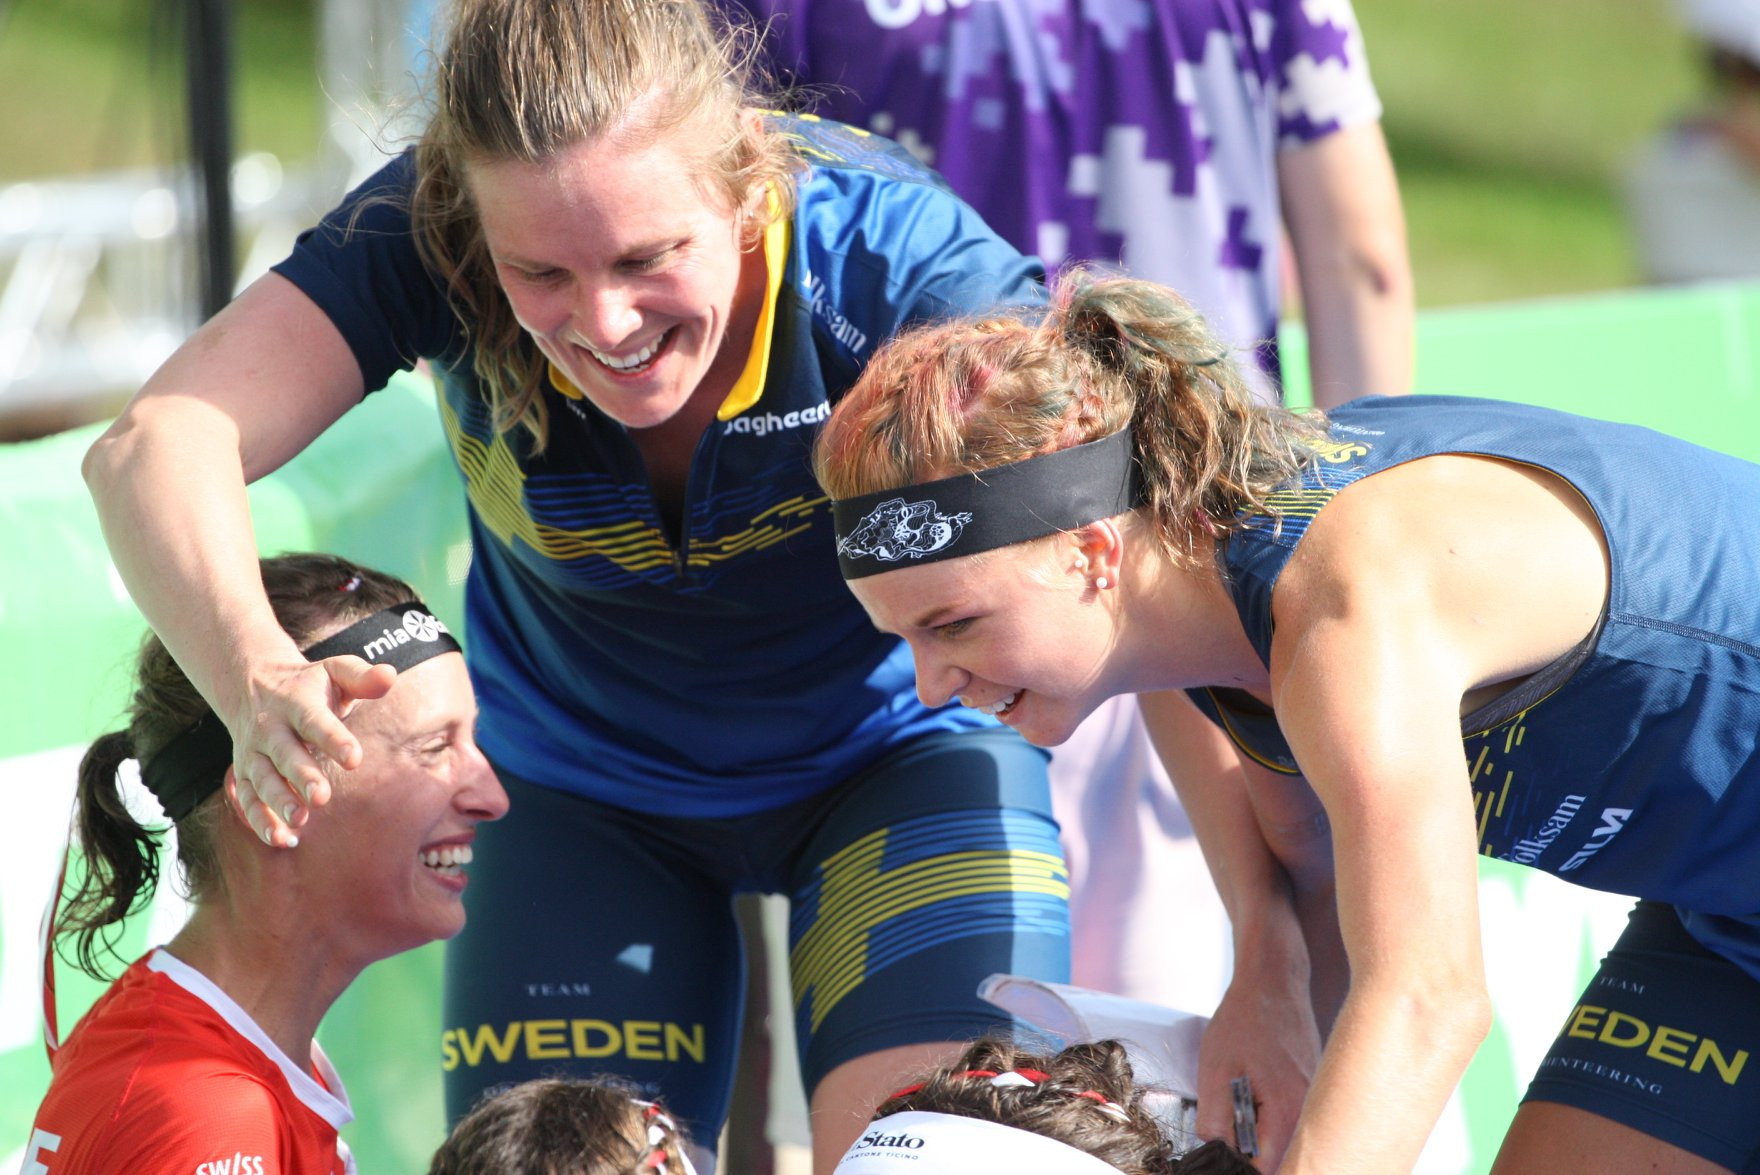 Sweden finished in second place in the women's race ©IOF